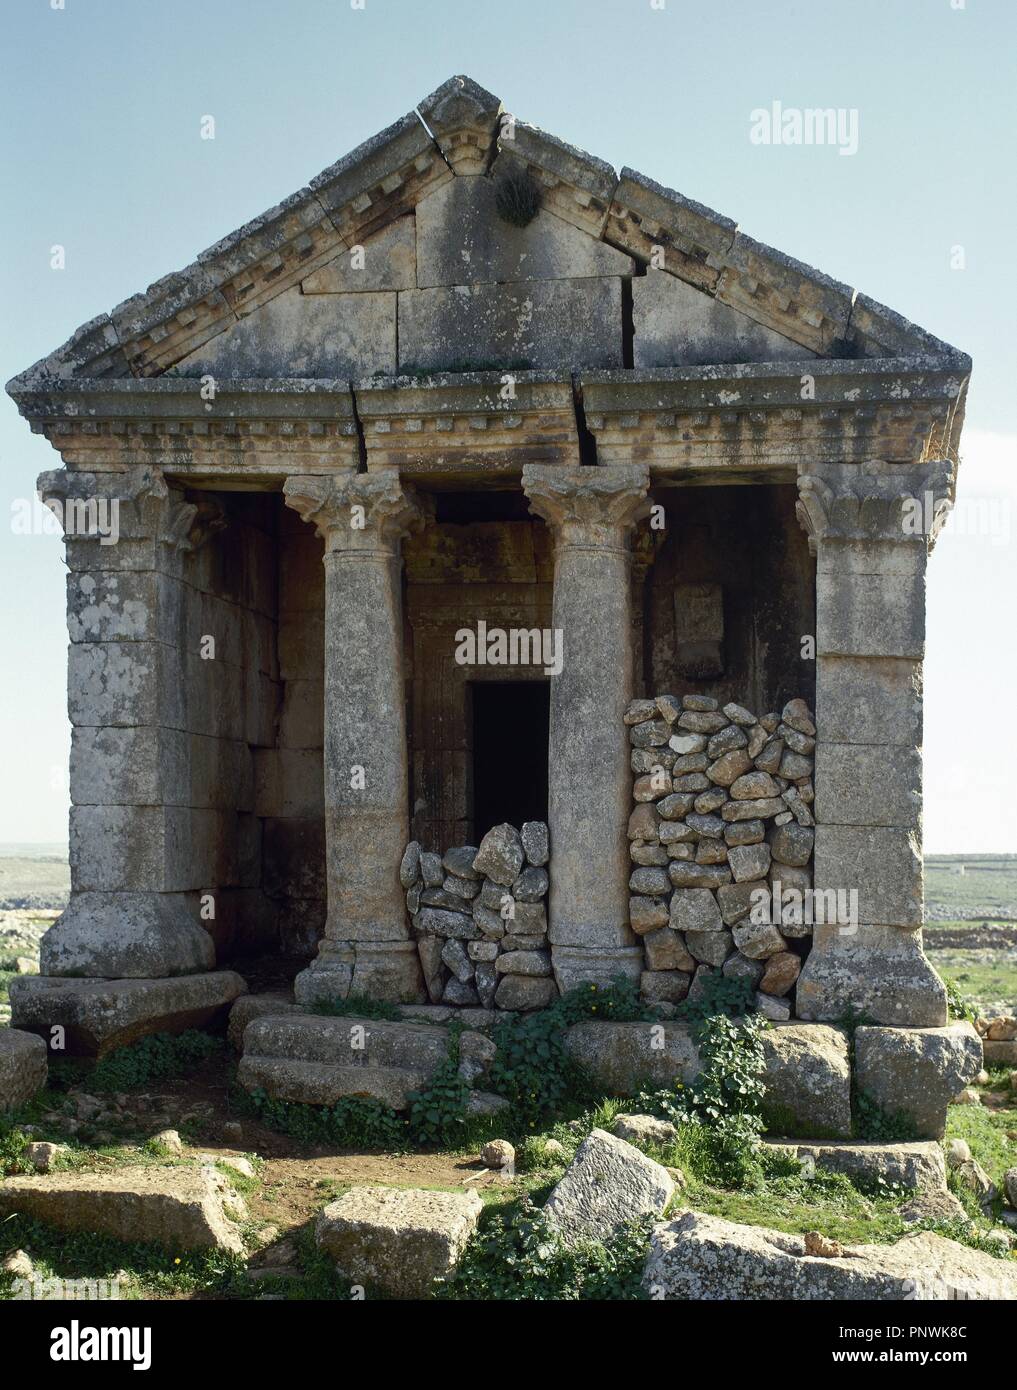 Syria. Rueiha. Dead Cities or Forgotten Cities. Northwest Syria. Roman Empire to Byzantine Christianity. 1st to 7th century, abandoned between 8th-10th century. Unesco World Heritage Site. Historical photography (before Syrian Civil War). Stock Photo